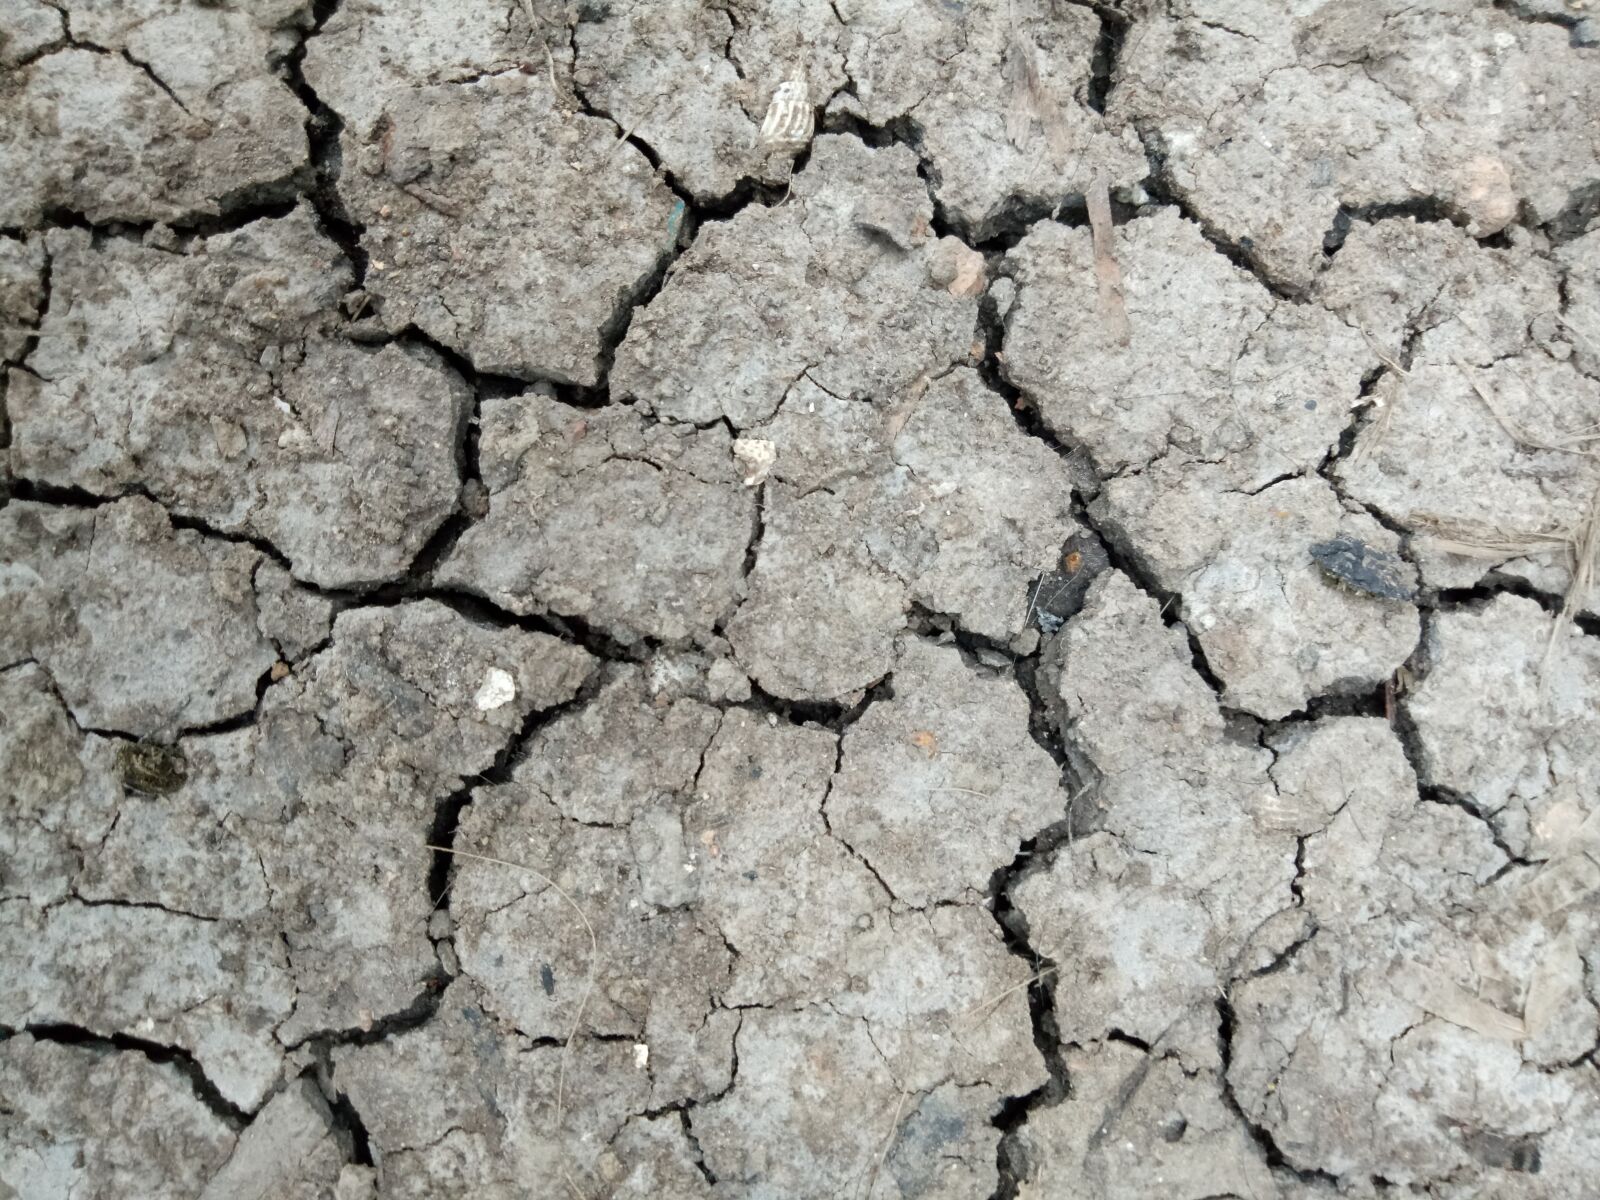 OPPO CPH1609 sample photo. Earth surface, drought, geology photography